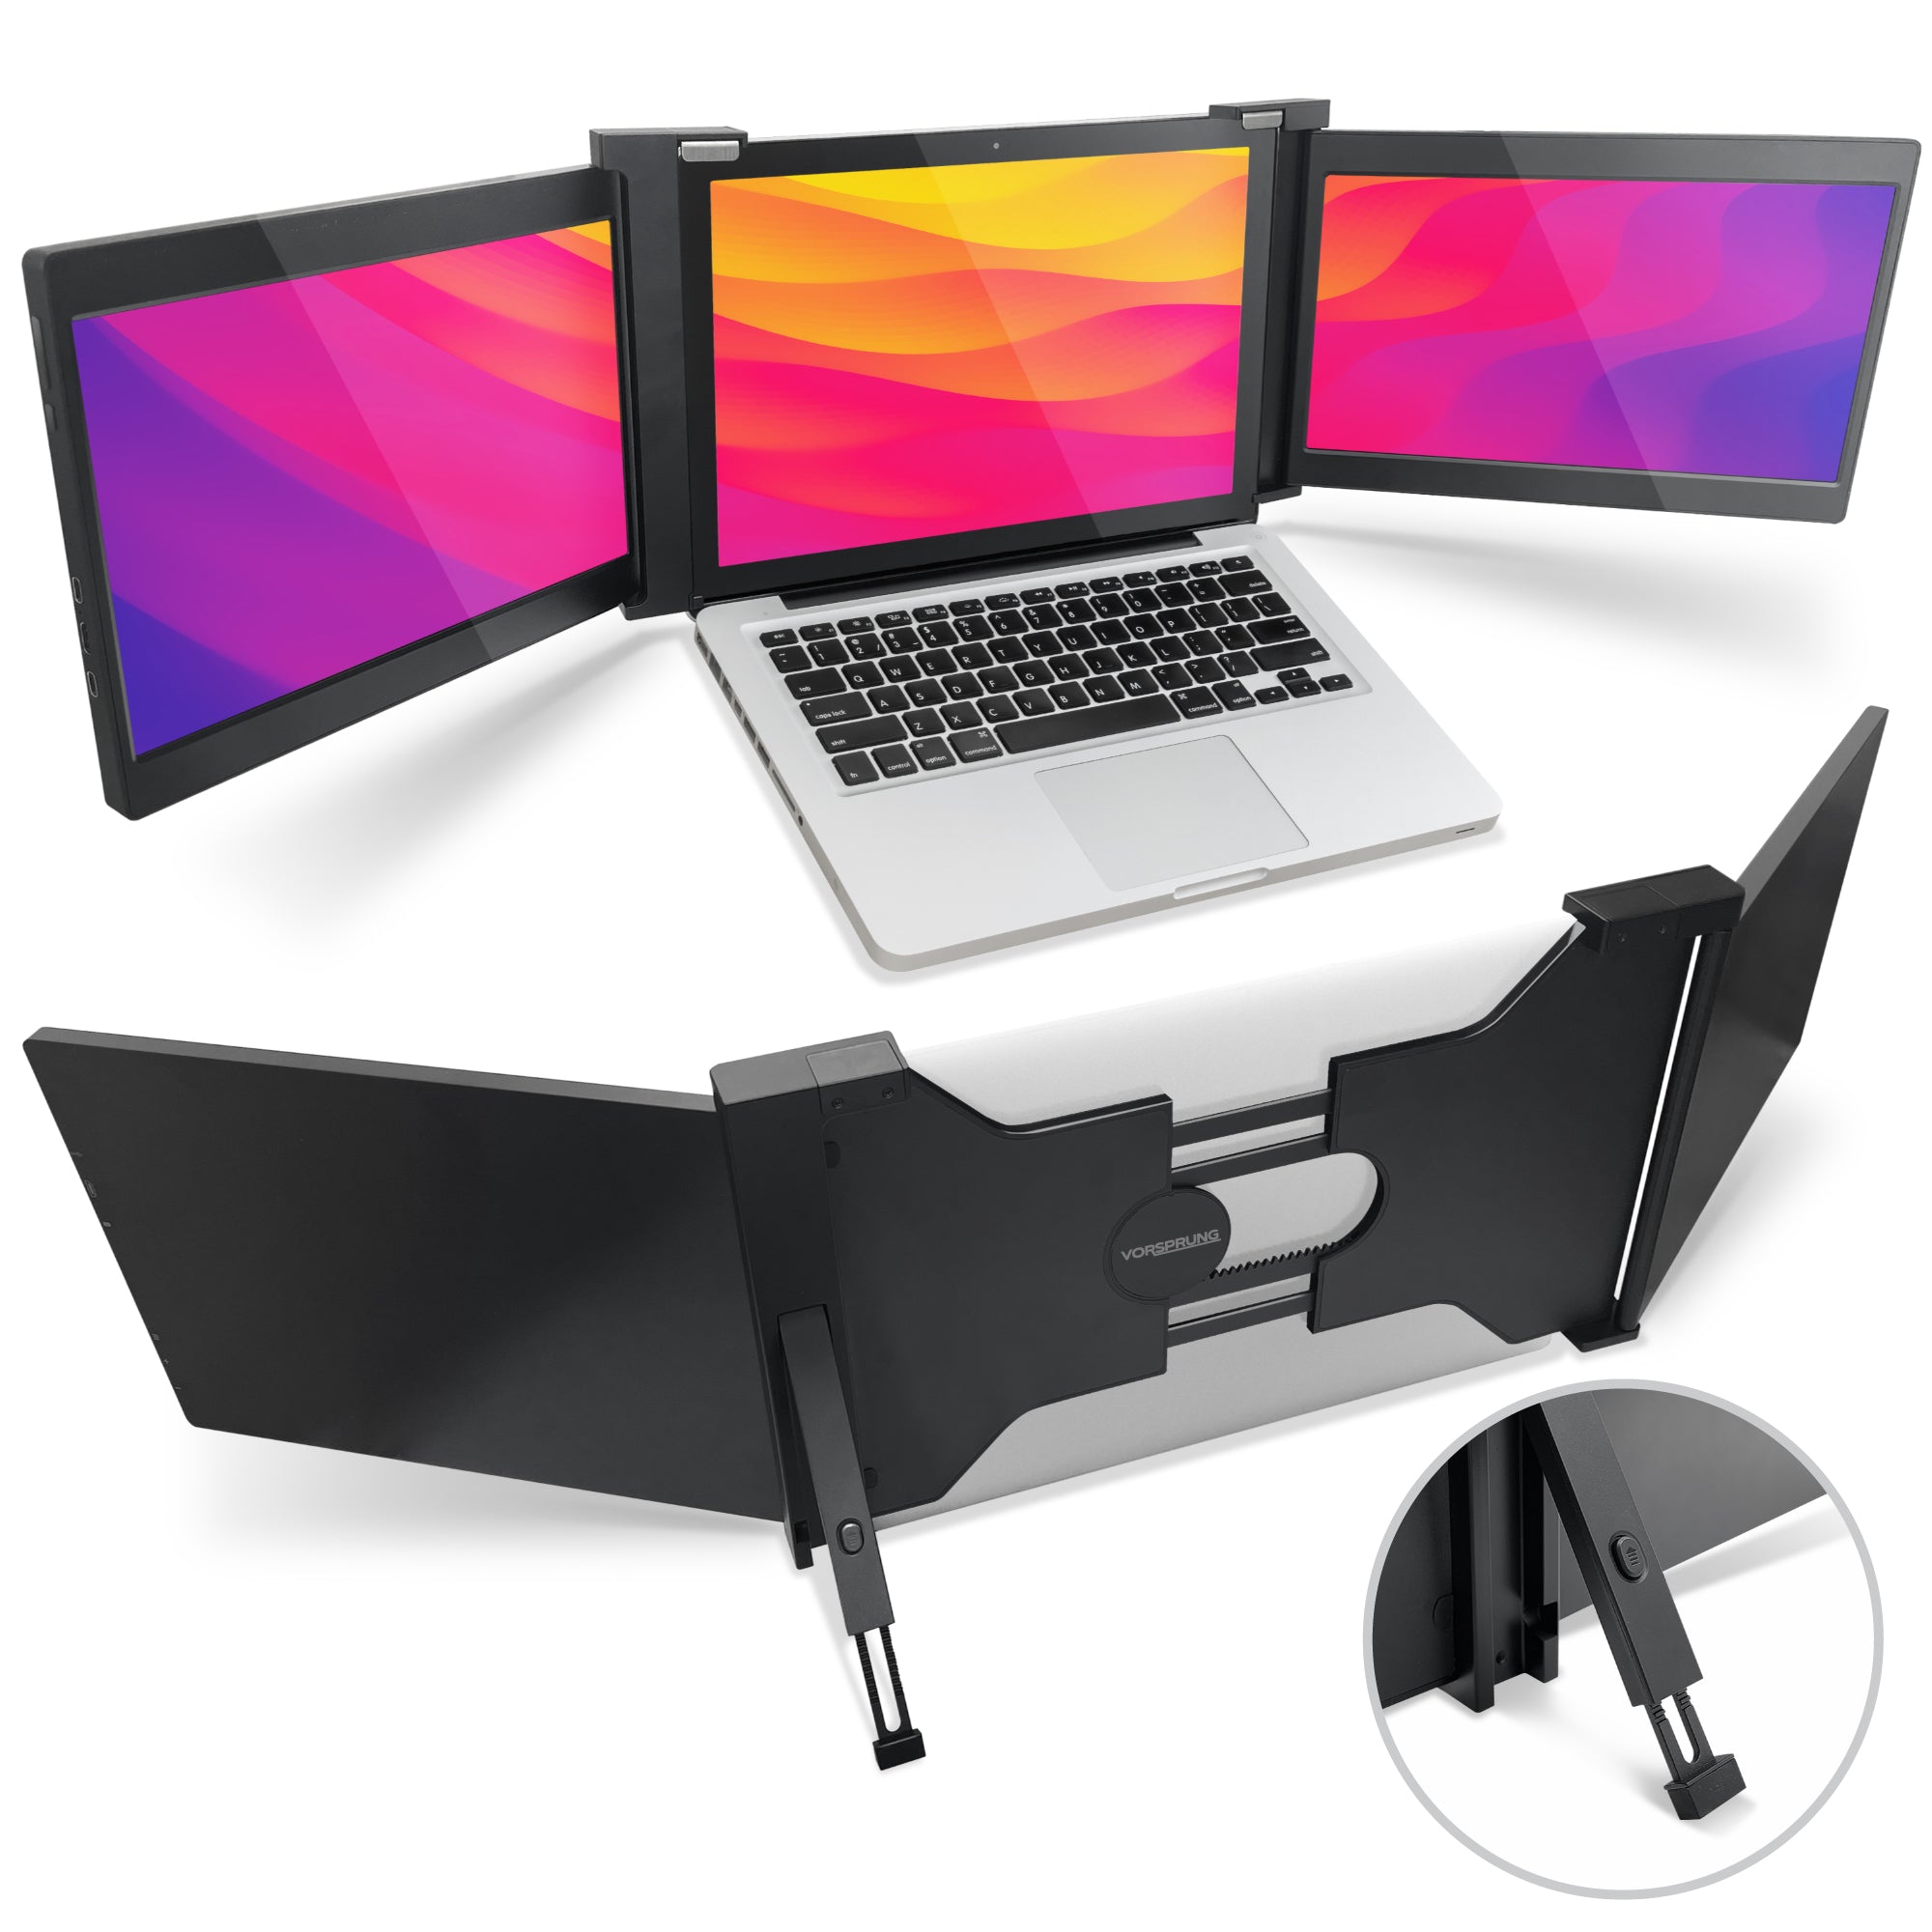 Triple Portable Monitor for Laptop | 12 | 1080P HD | Compatible with